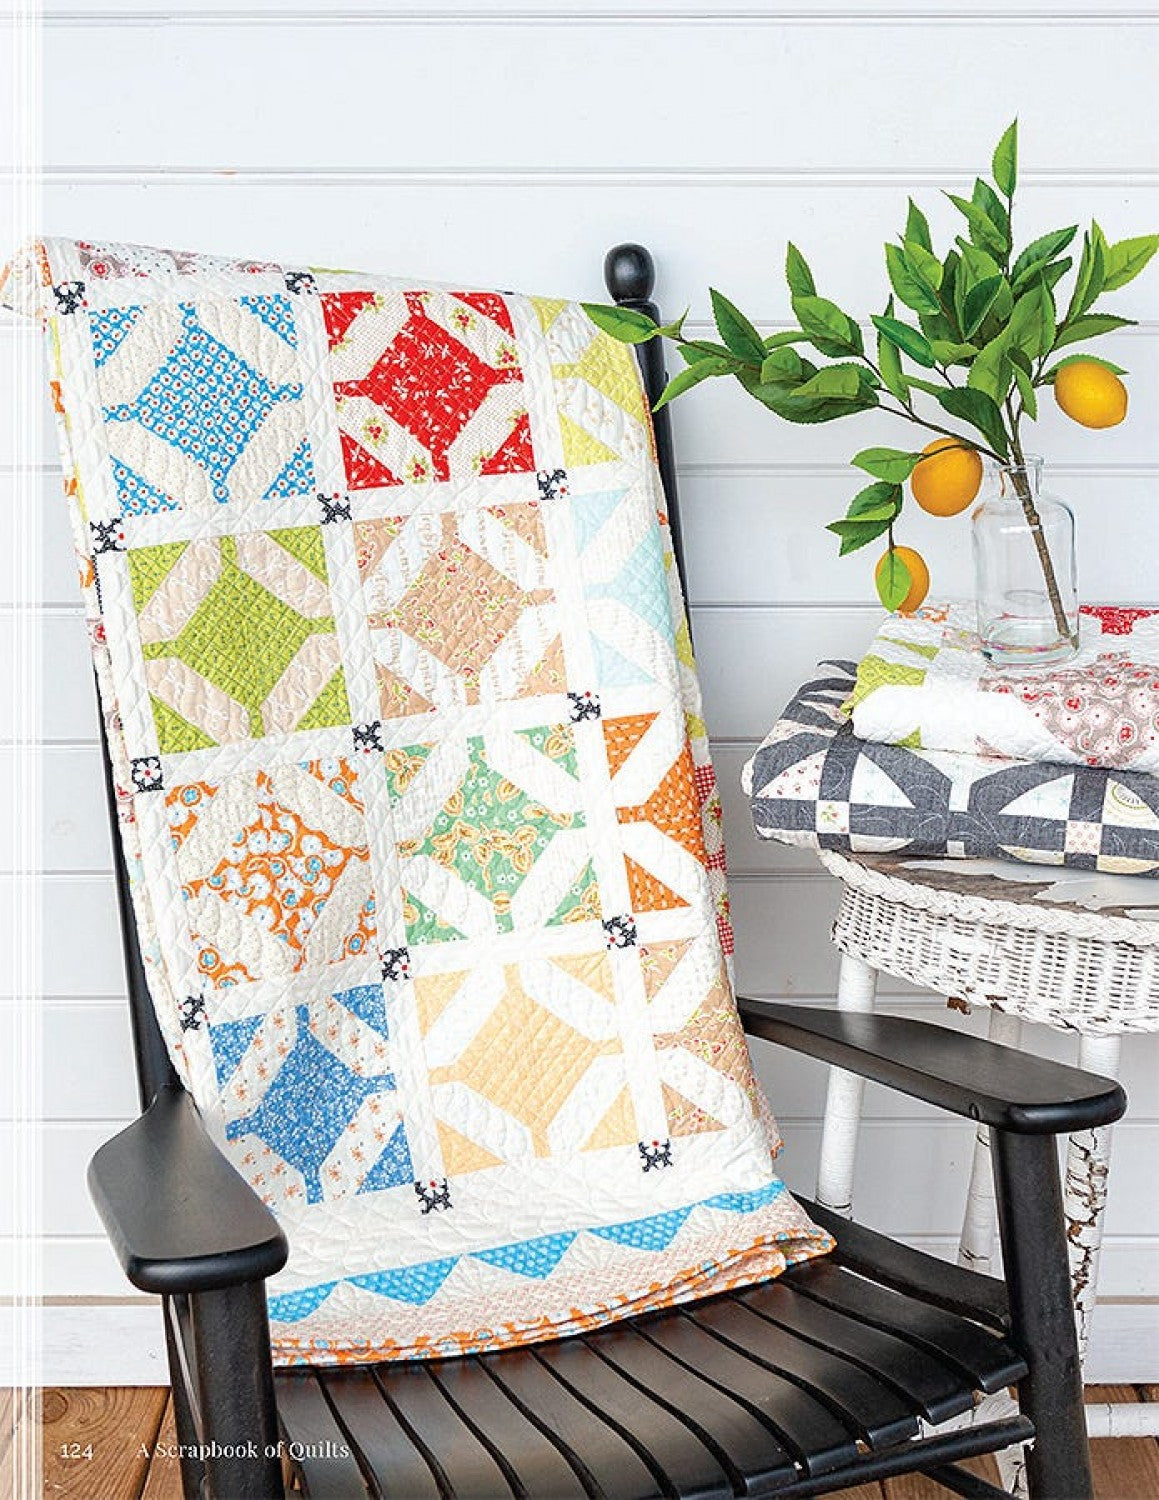 A Scrapbook Of Quilts Quilt Pattern Book by Carrie Nelson and Joanna Figueroa for It's Sew Emma